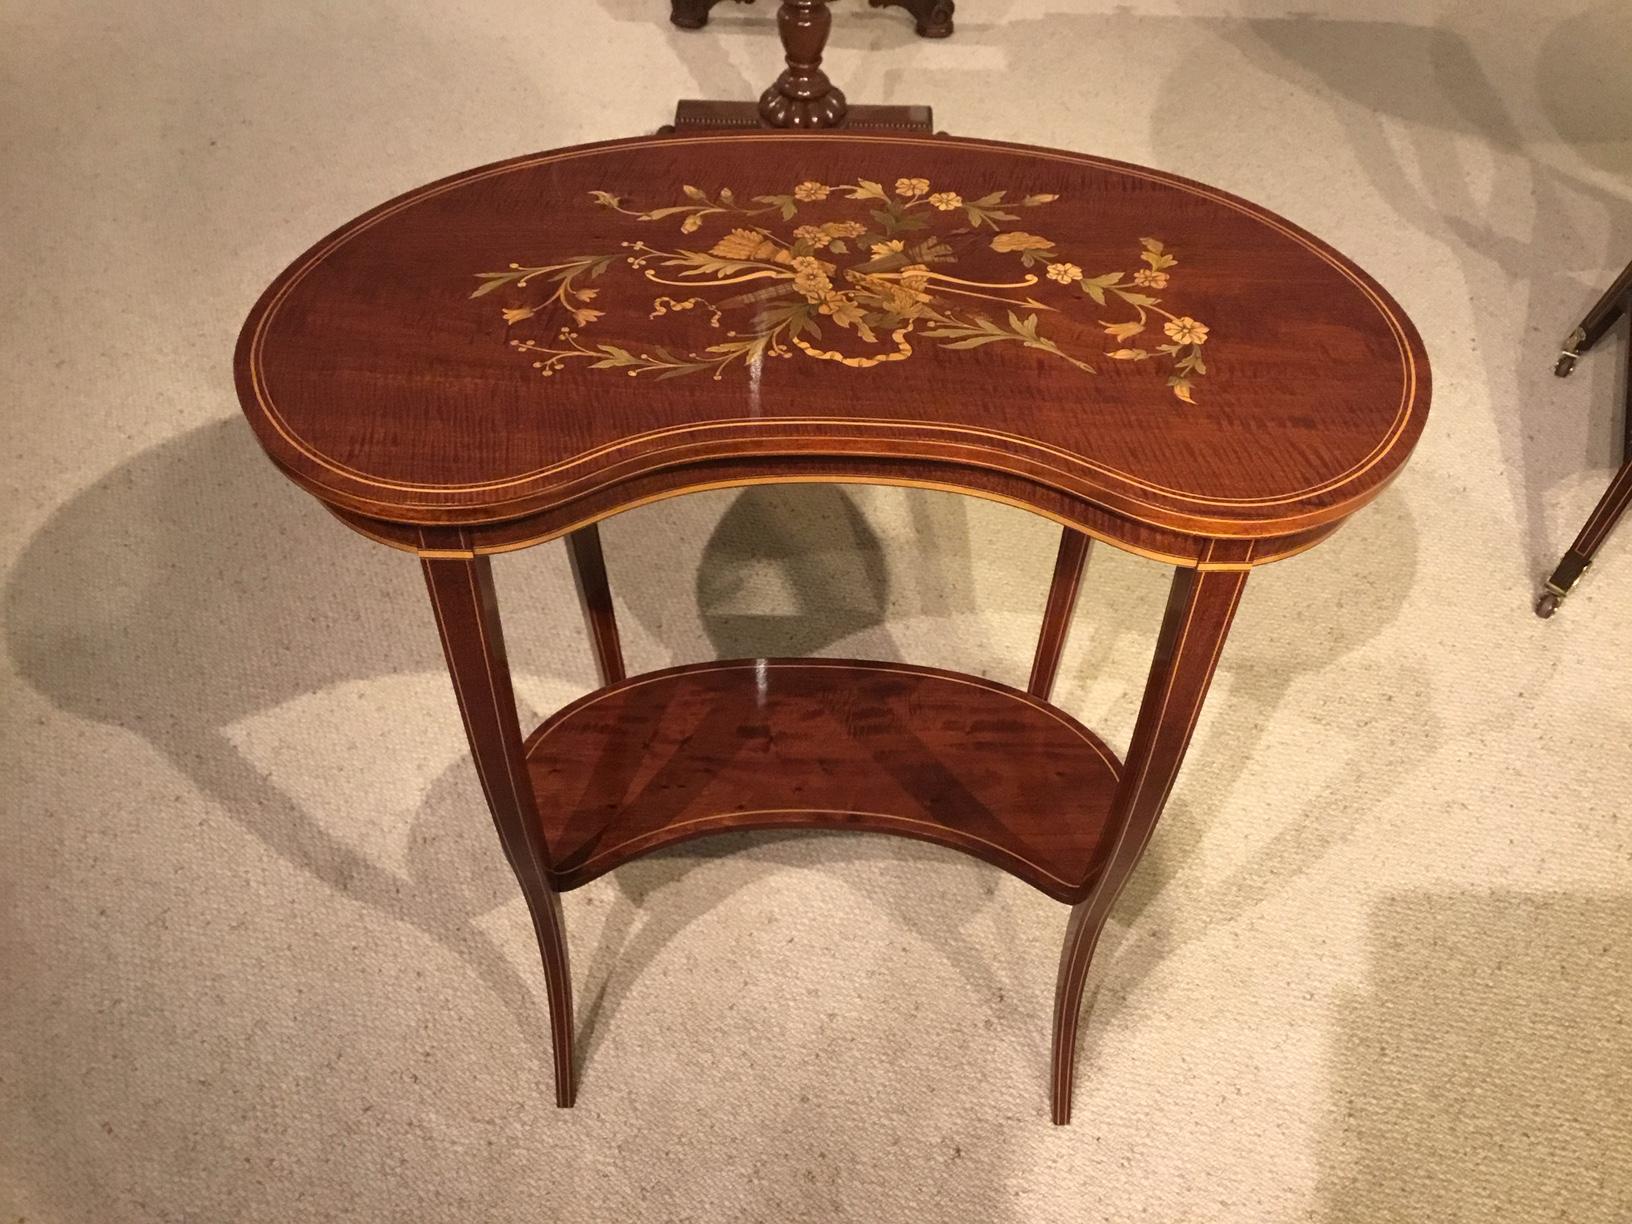 Mahogany Inlaid Edwardian Period Kidney Shaped Occasional Table For Sale 6